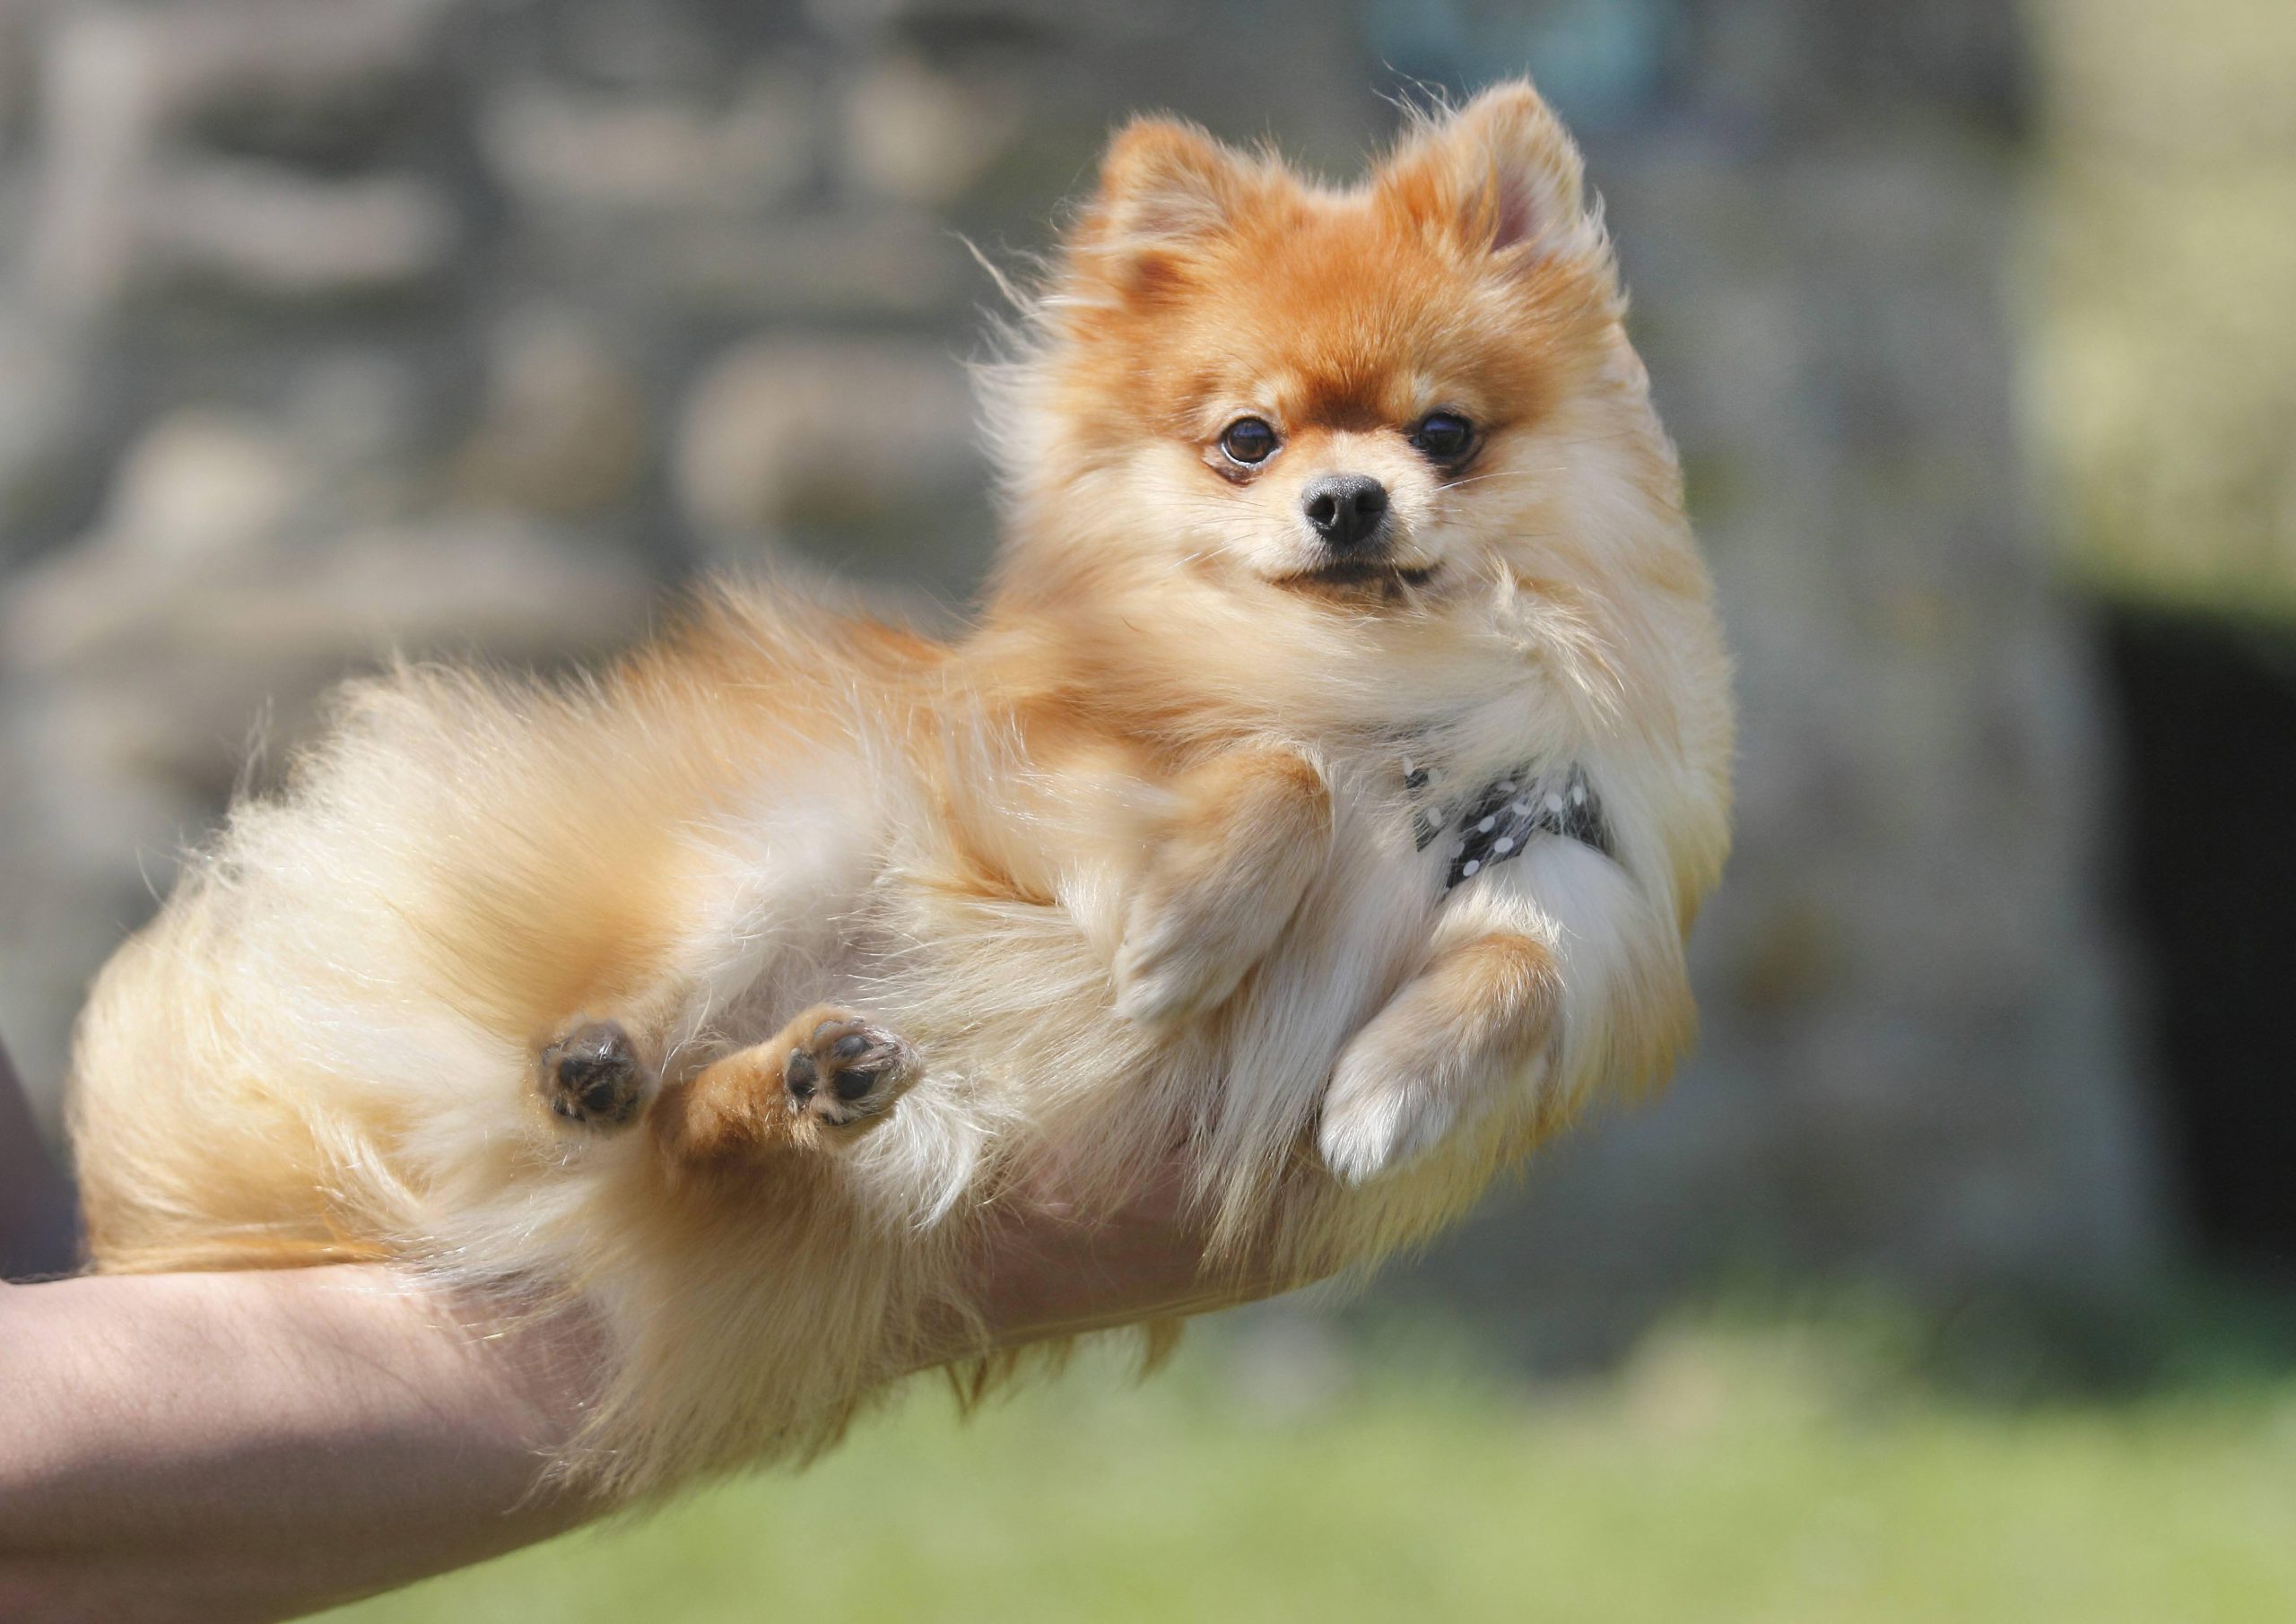 Andalucia gang publish cute photos of Pomeranian puppies to scam online buyers out of €30,000 across Spain